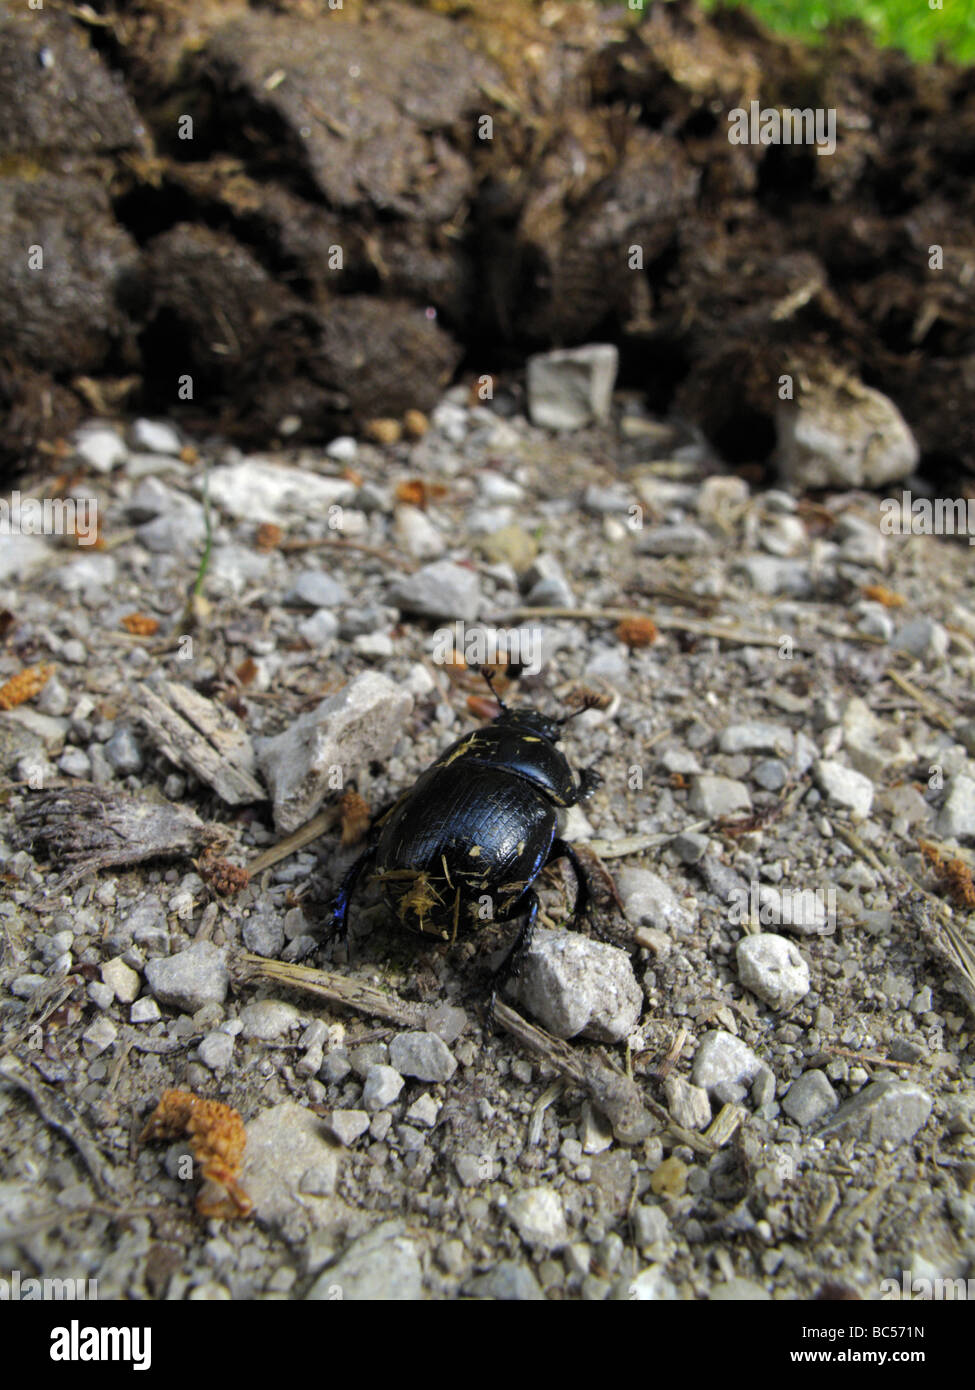 Dor beetle approaching a pile of horse manure. (Geotrupes stercorarius or Anoplotrupes stercorosus) Stock Photo